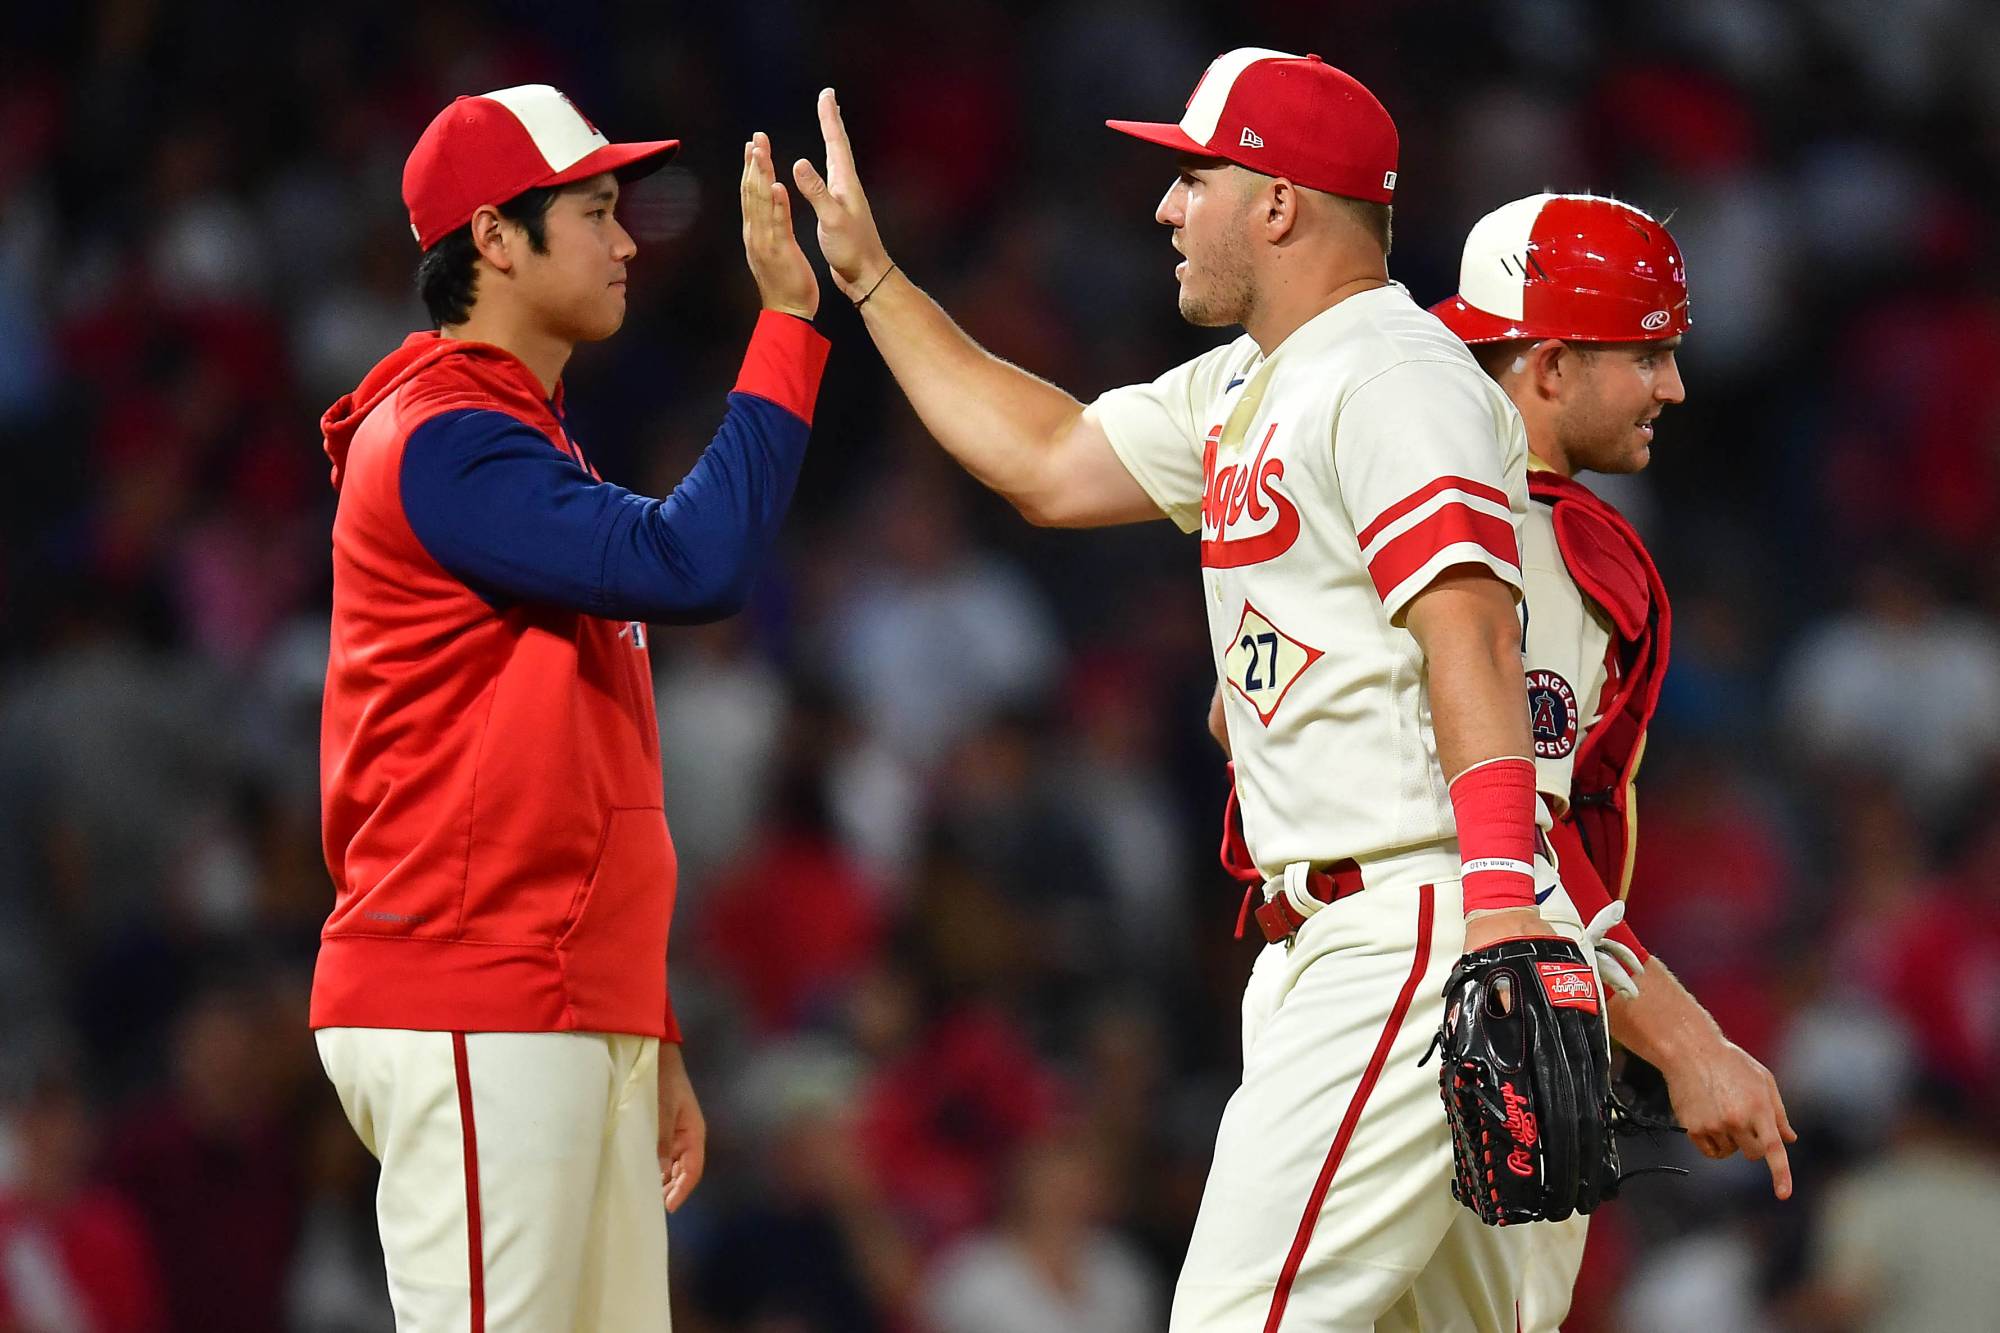 Mike Trout hopes for WBC battle against Angels teammate Shohei